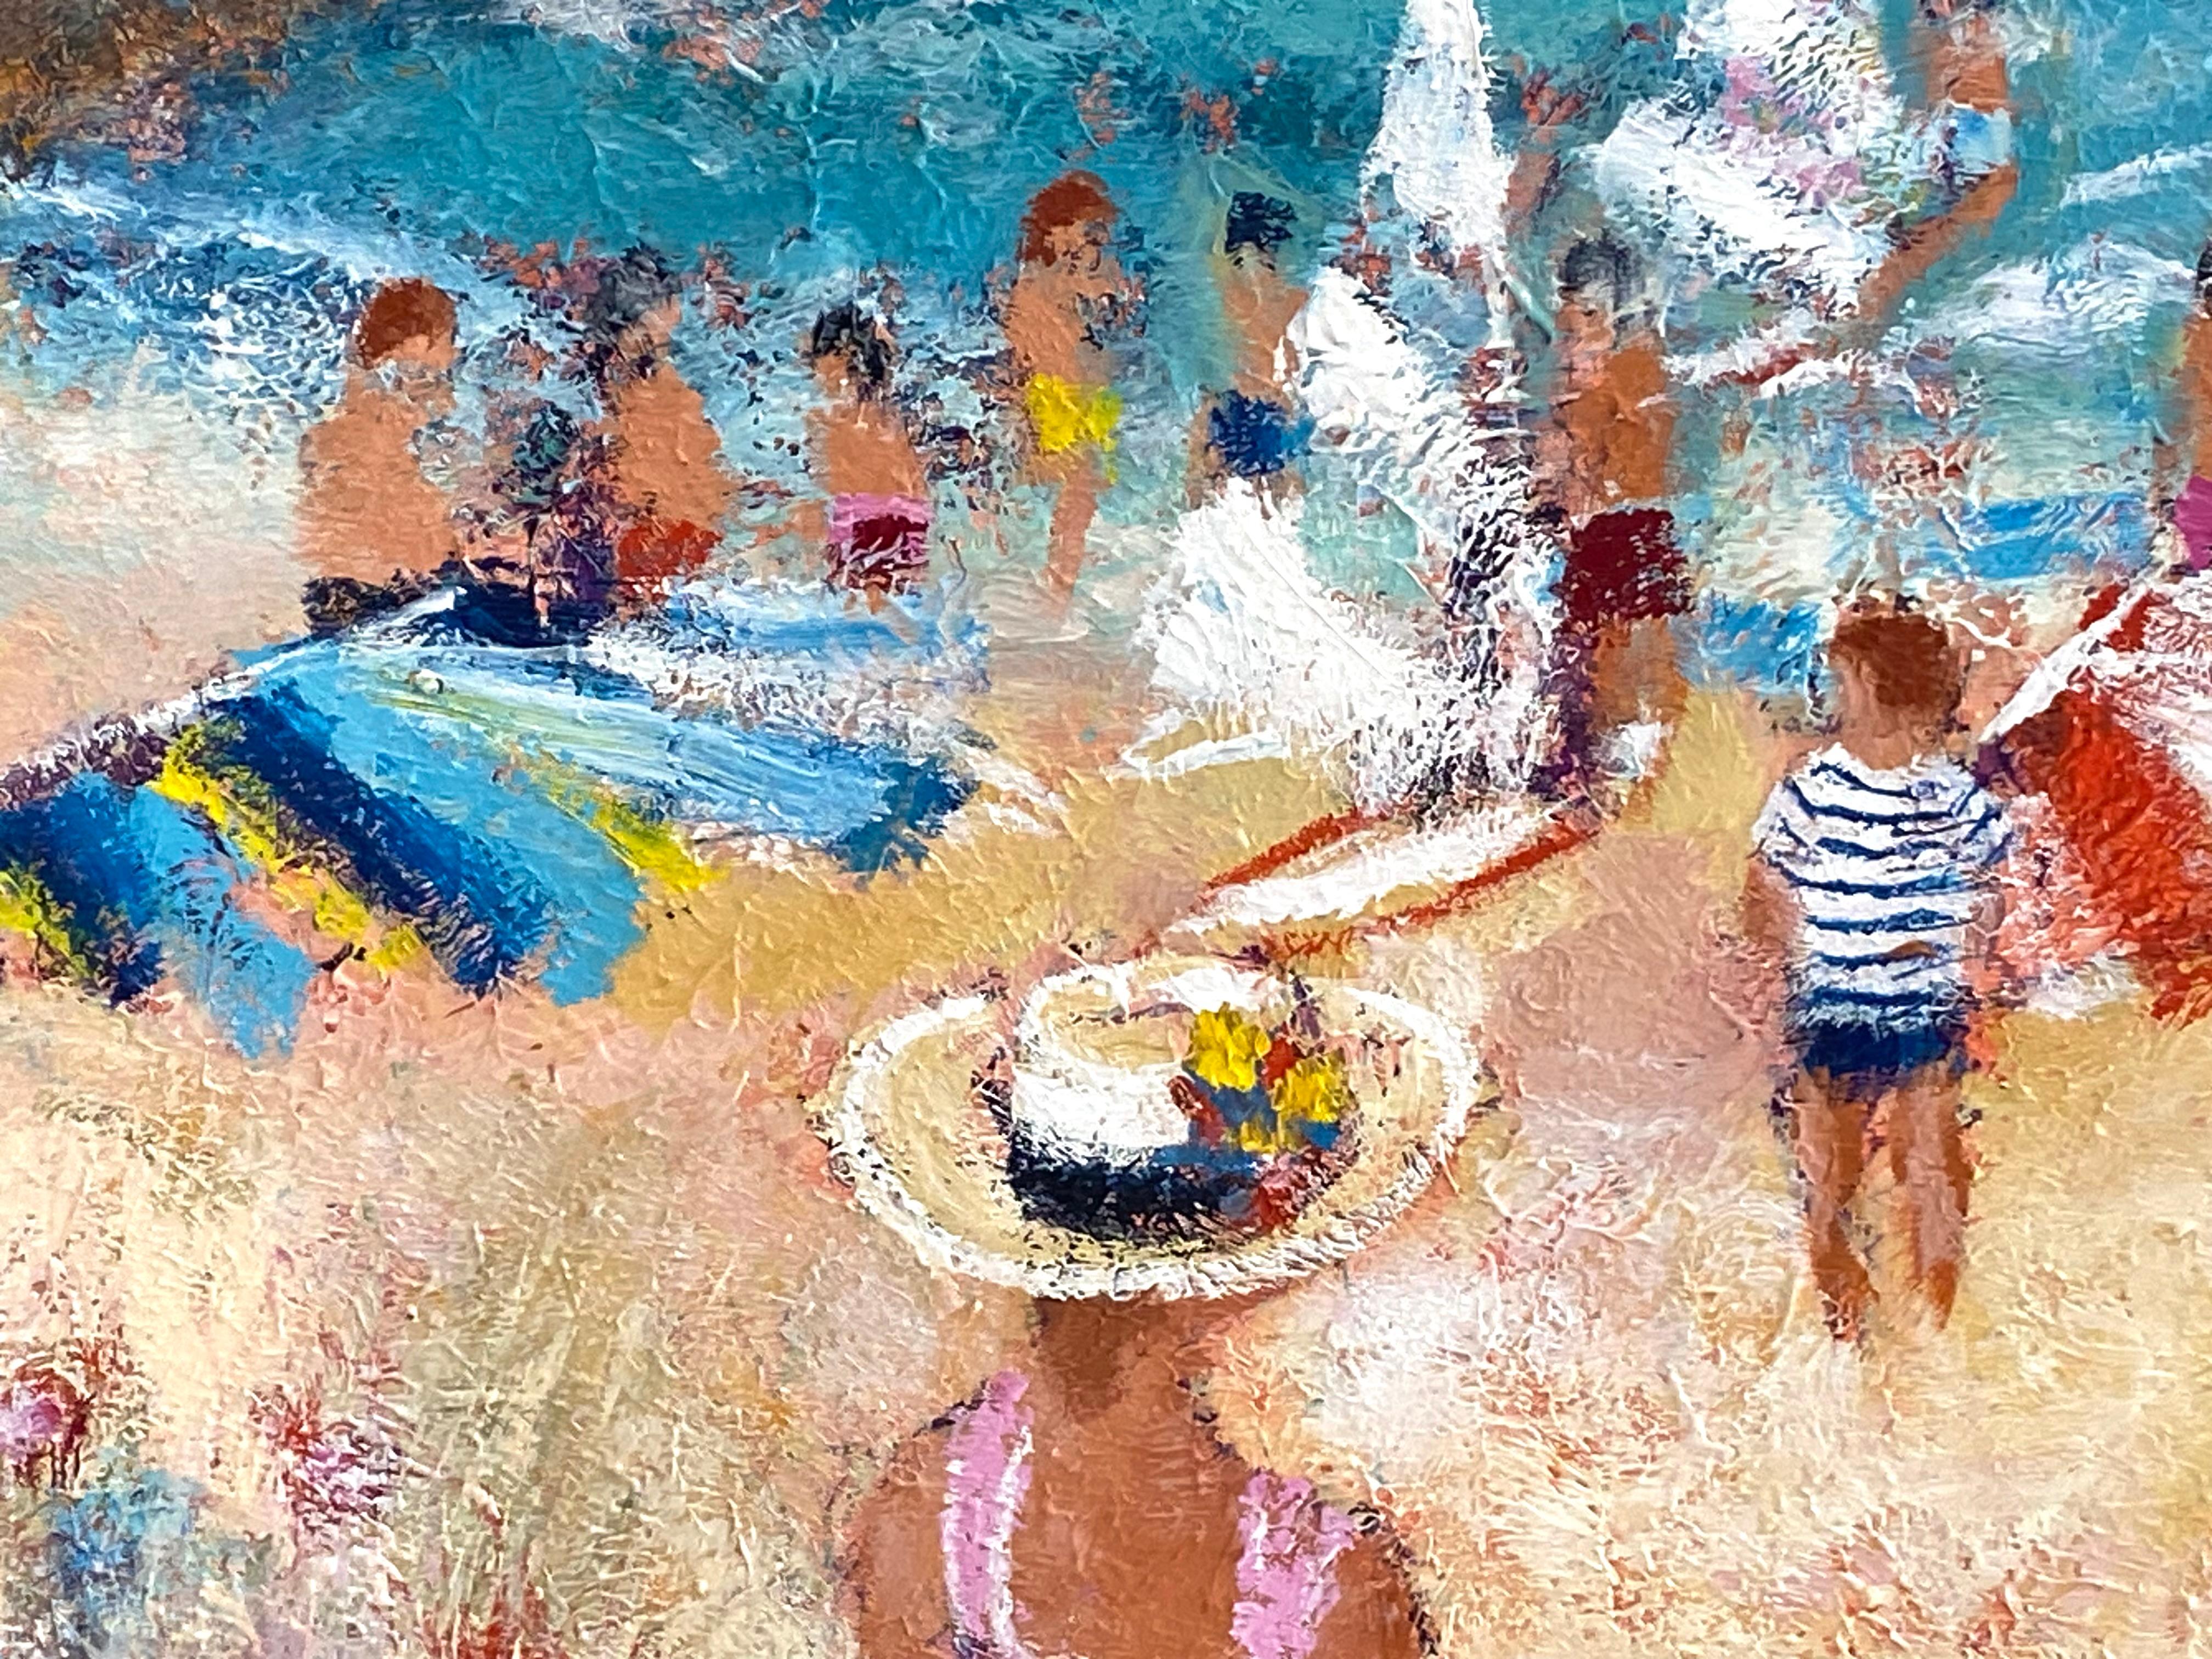 Beautiful major original work by the well known French artist Urbain Huchet.  Signed lower right.  Circa 1985.  The condition of the painting is excellent.  Huchet perfectly captures an idyllic day at the beach and the activities that encapsulate